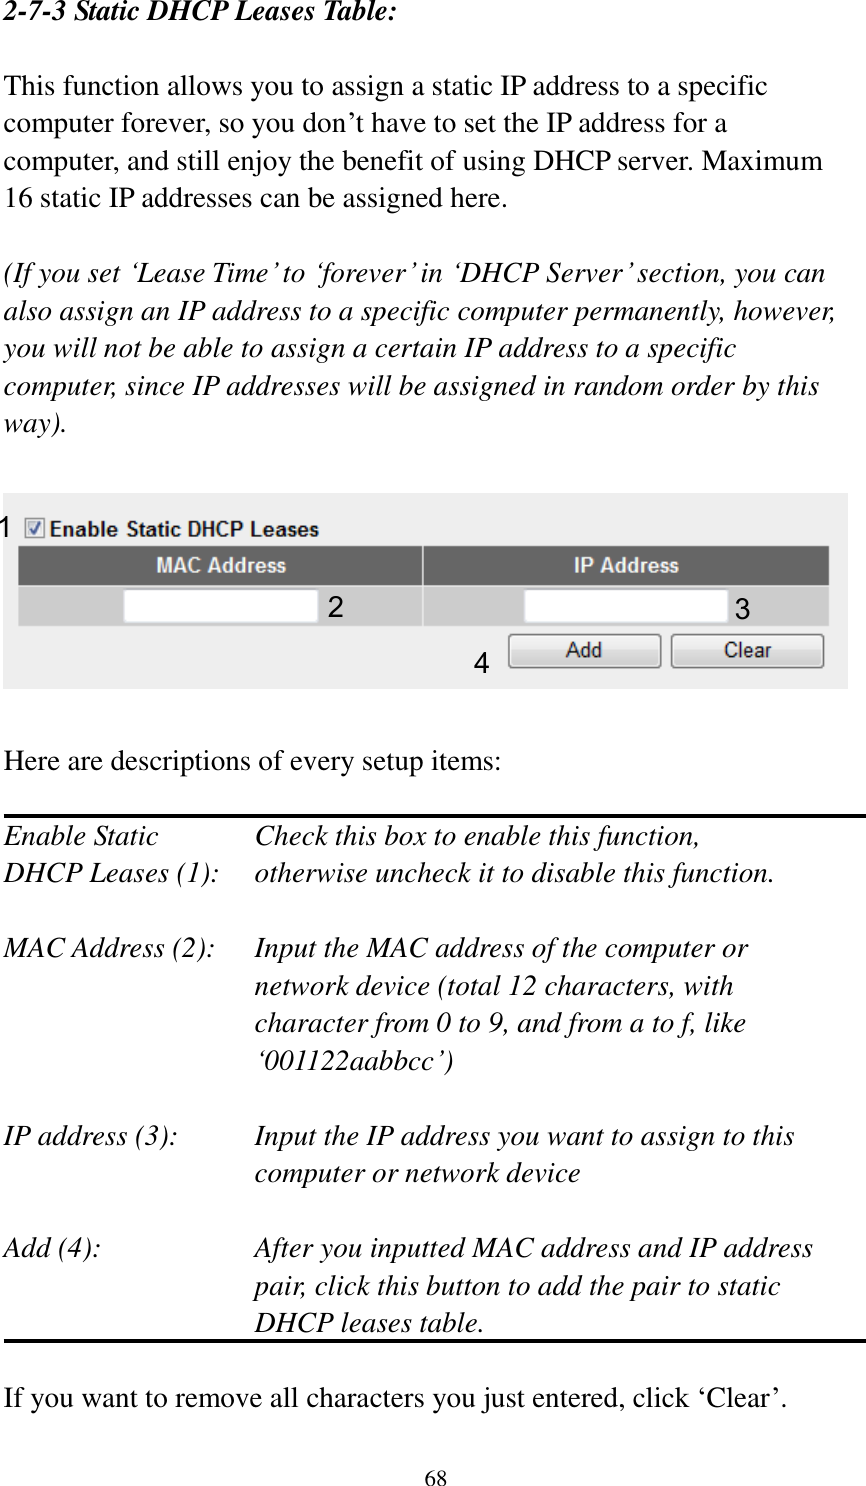 68 2-7-3 Static DHCP Leases Table:  This function allows you to assign a static IP address to a specific computer forever, so you don‟t have to set the IP address for a computer, and still enjoy the benefit of using DHCP server. Maximum 16 static IP addresses can be assigned here.  (If you set „Lease Time‟ to „forever‟ in „DHCP Server‟ section, you can also assign an IP address to a specific computer permanently, however, you will not be able to assign a certain IP address to a specific computer, since IP addresses will be assigned in random order by this way).      Here are descriptions of every setup items:  Enable Static      Check this box to enable this function, DHCP Leases (1):    otherwise uncheck it to disable this function.  MAC Address (2):    Input the MAC address of the computer or network device (total 12 characters, with character from 0 to 9, and from a to f, like „001122aabbcc‟)    IP address (3):    Input the IP address you want to assign to this computer or network device    Add (4):    After you inputted MAC address and IP address pair, click this button to add the pair to static DHCP leases table.  If you want to remove all characters you just entered, click „Clear‟. 1 2 3 4 